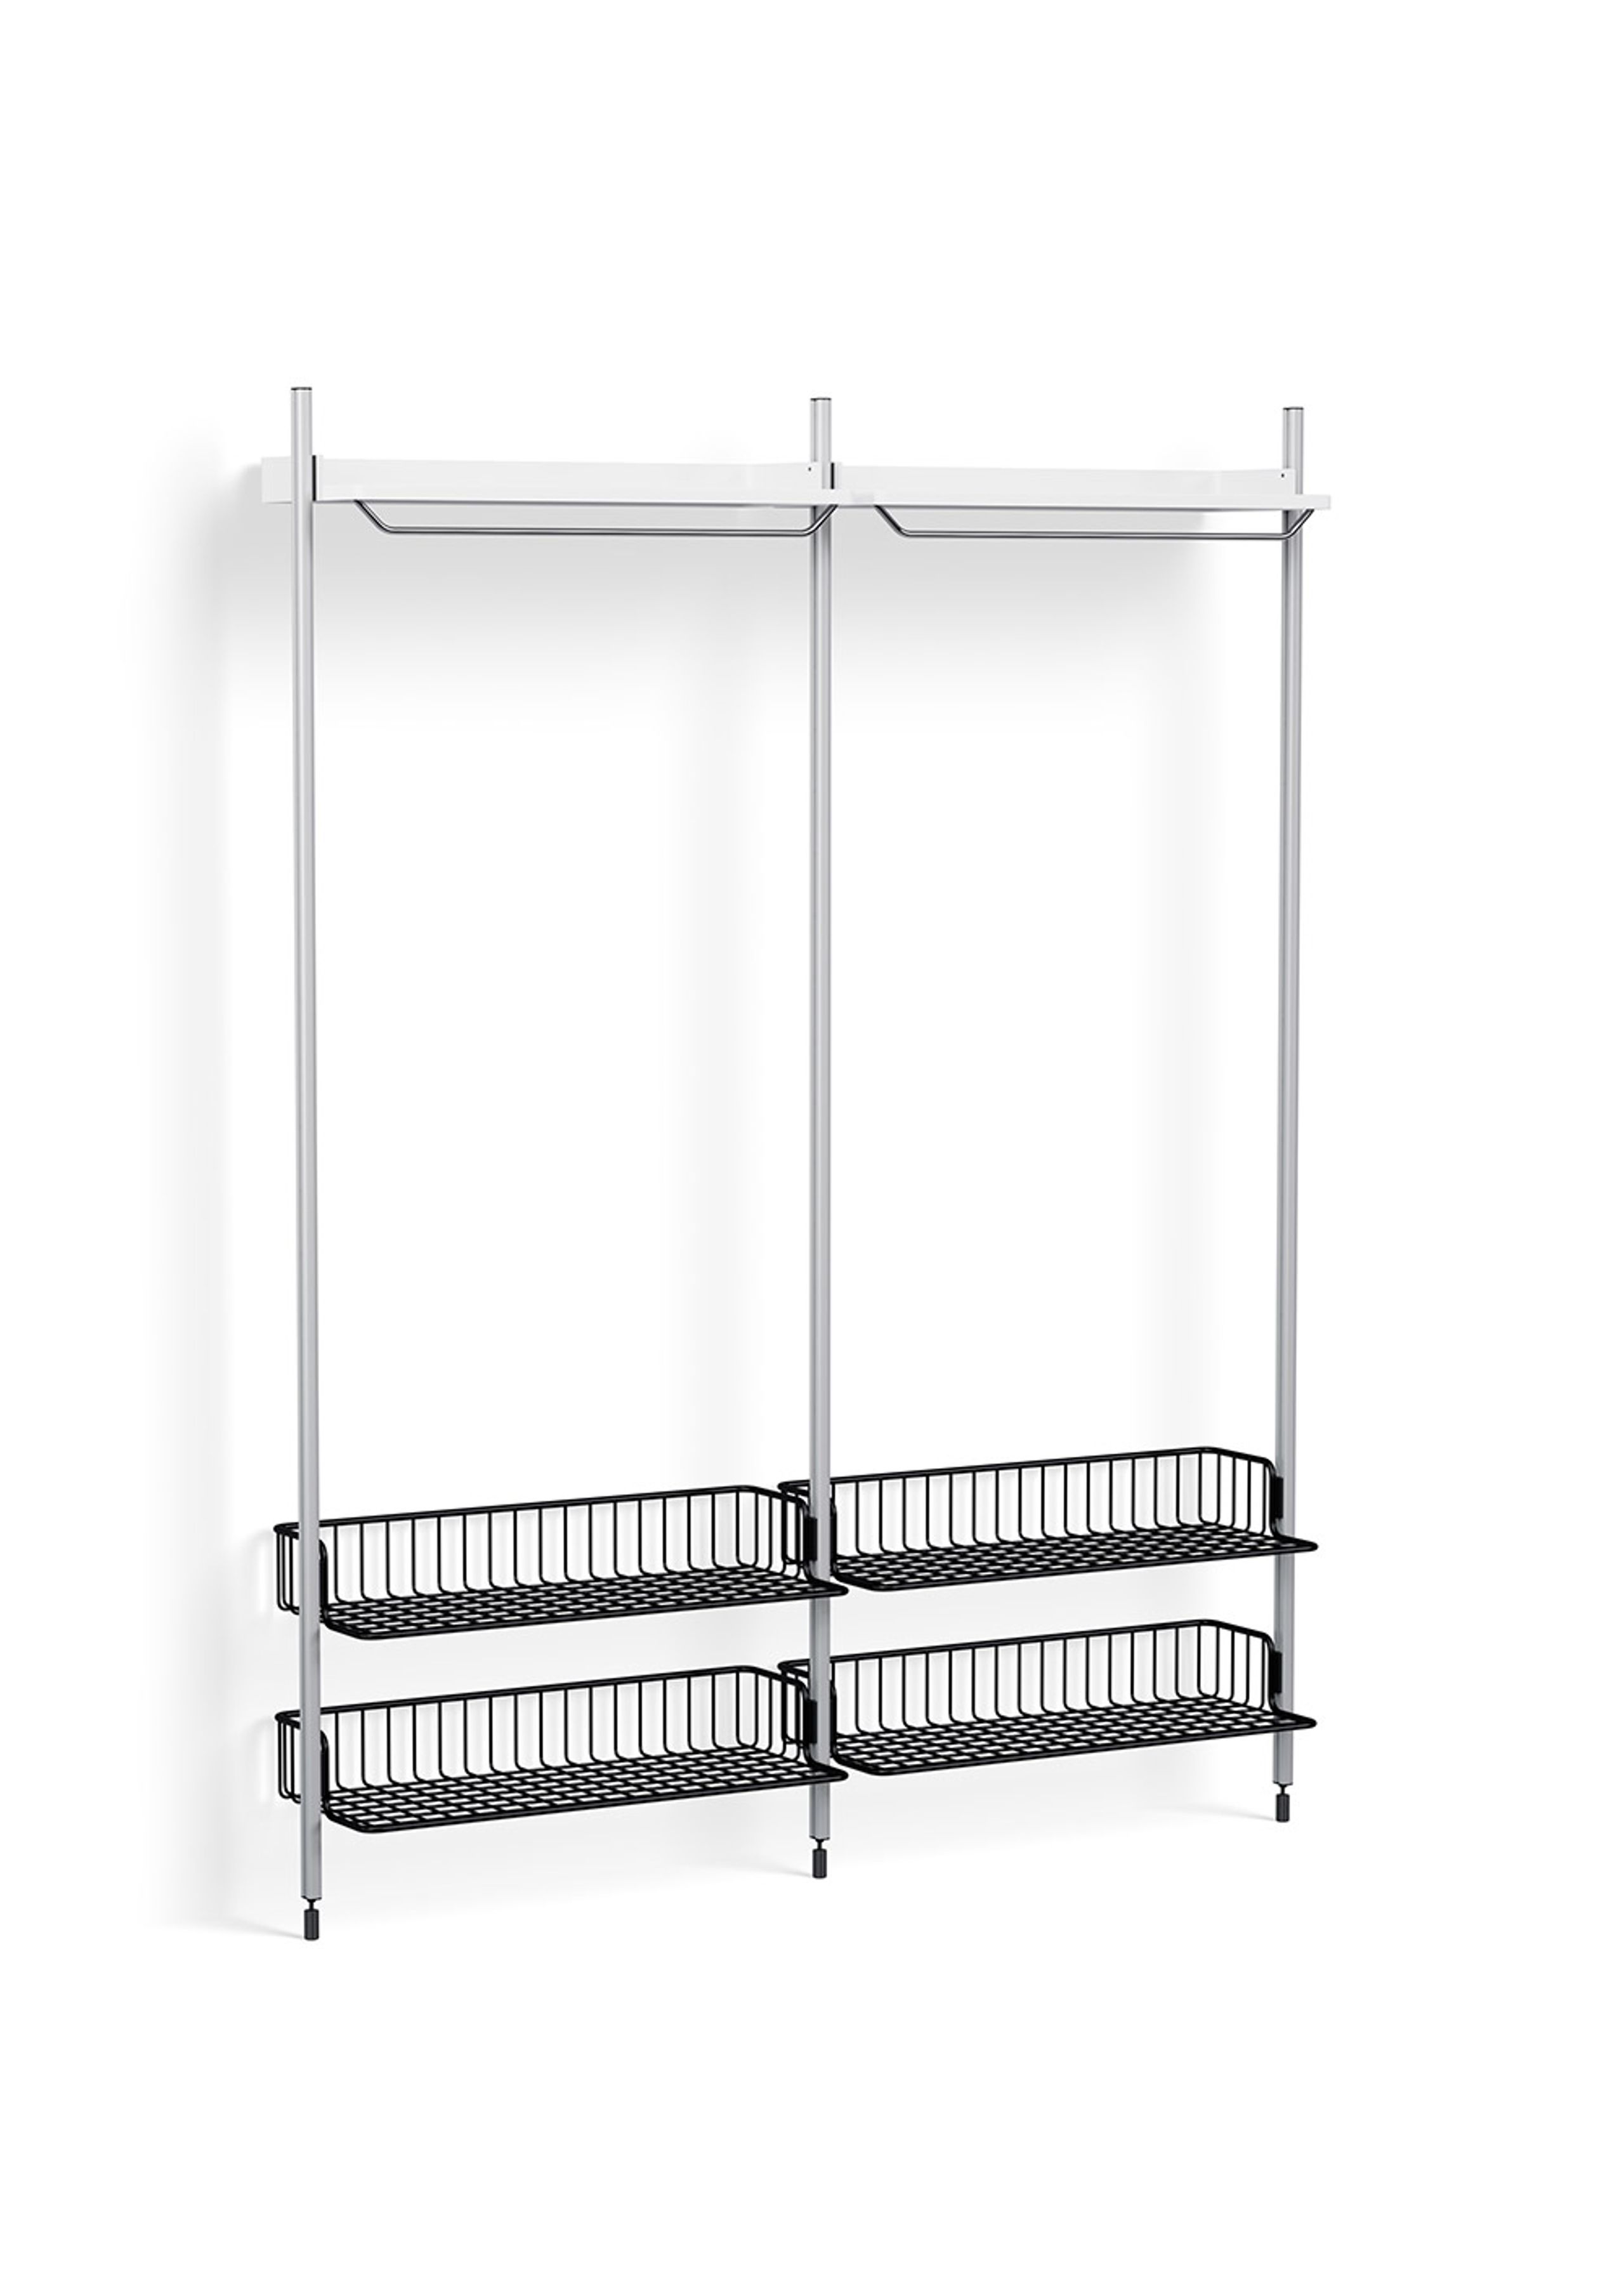 HAY - Reol - Pier System / No. 1012 - White / Clear Anodised Aluminium